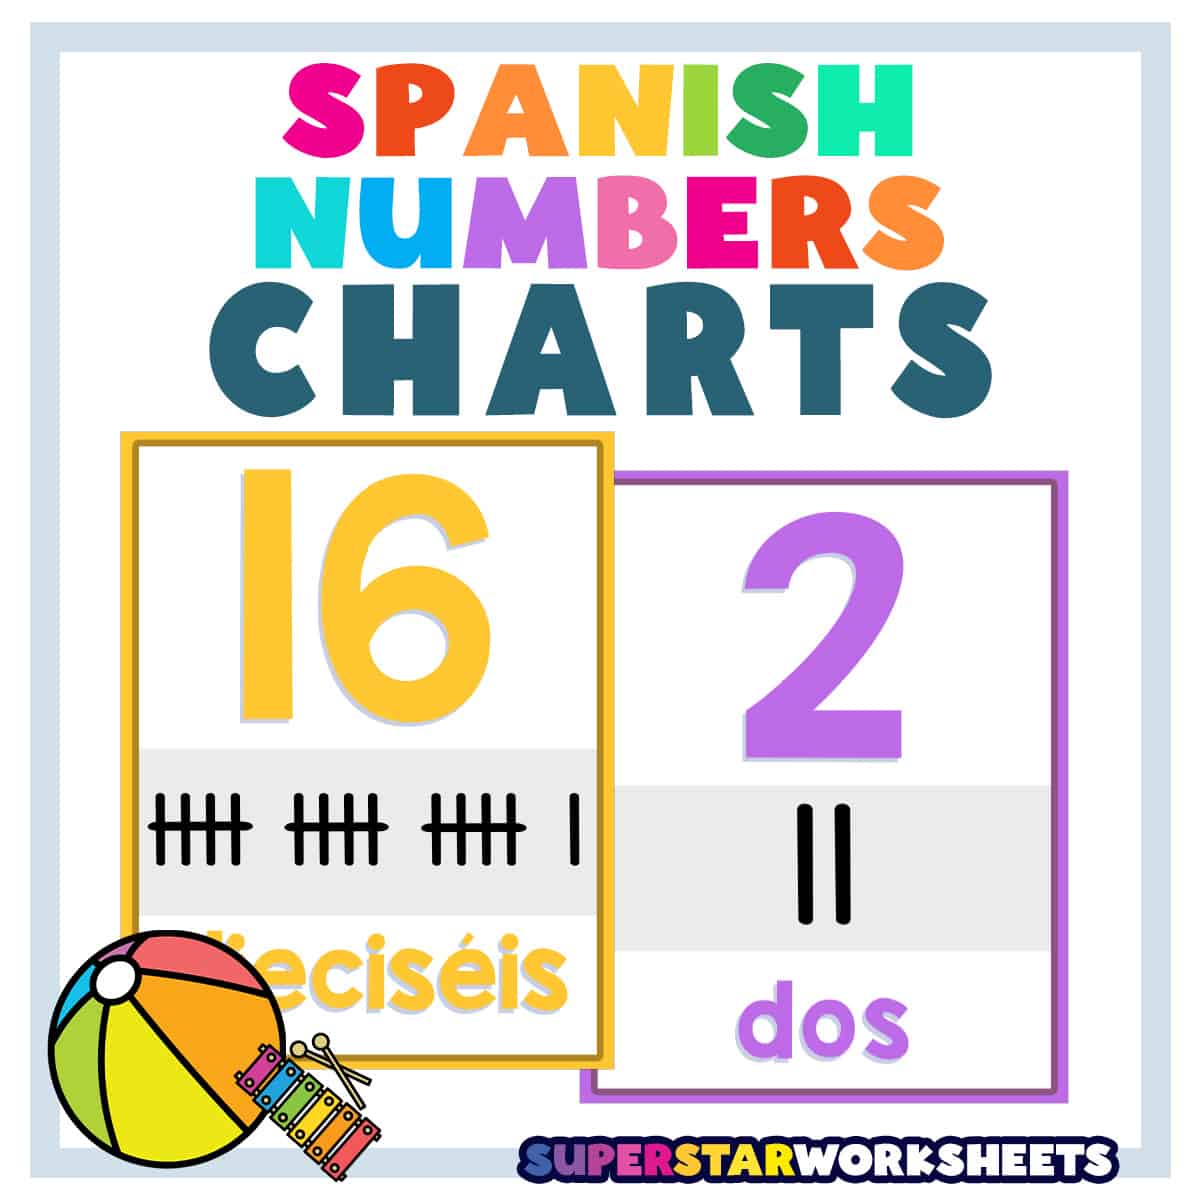 LAMINATED Numbers Anchor Chart 